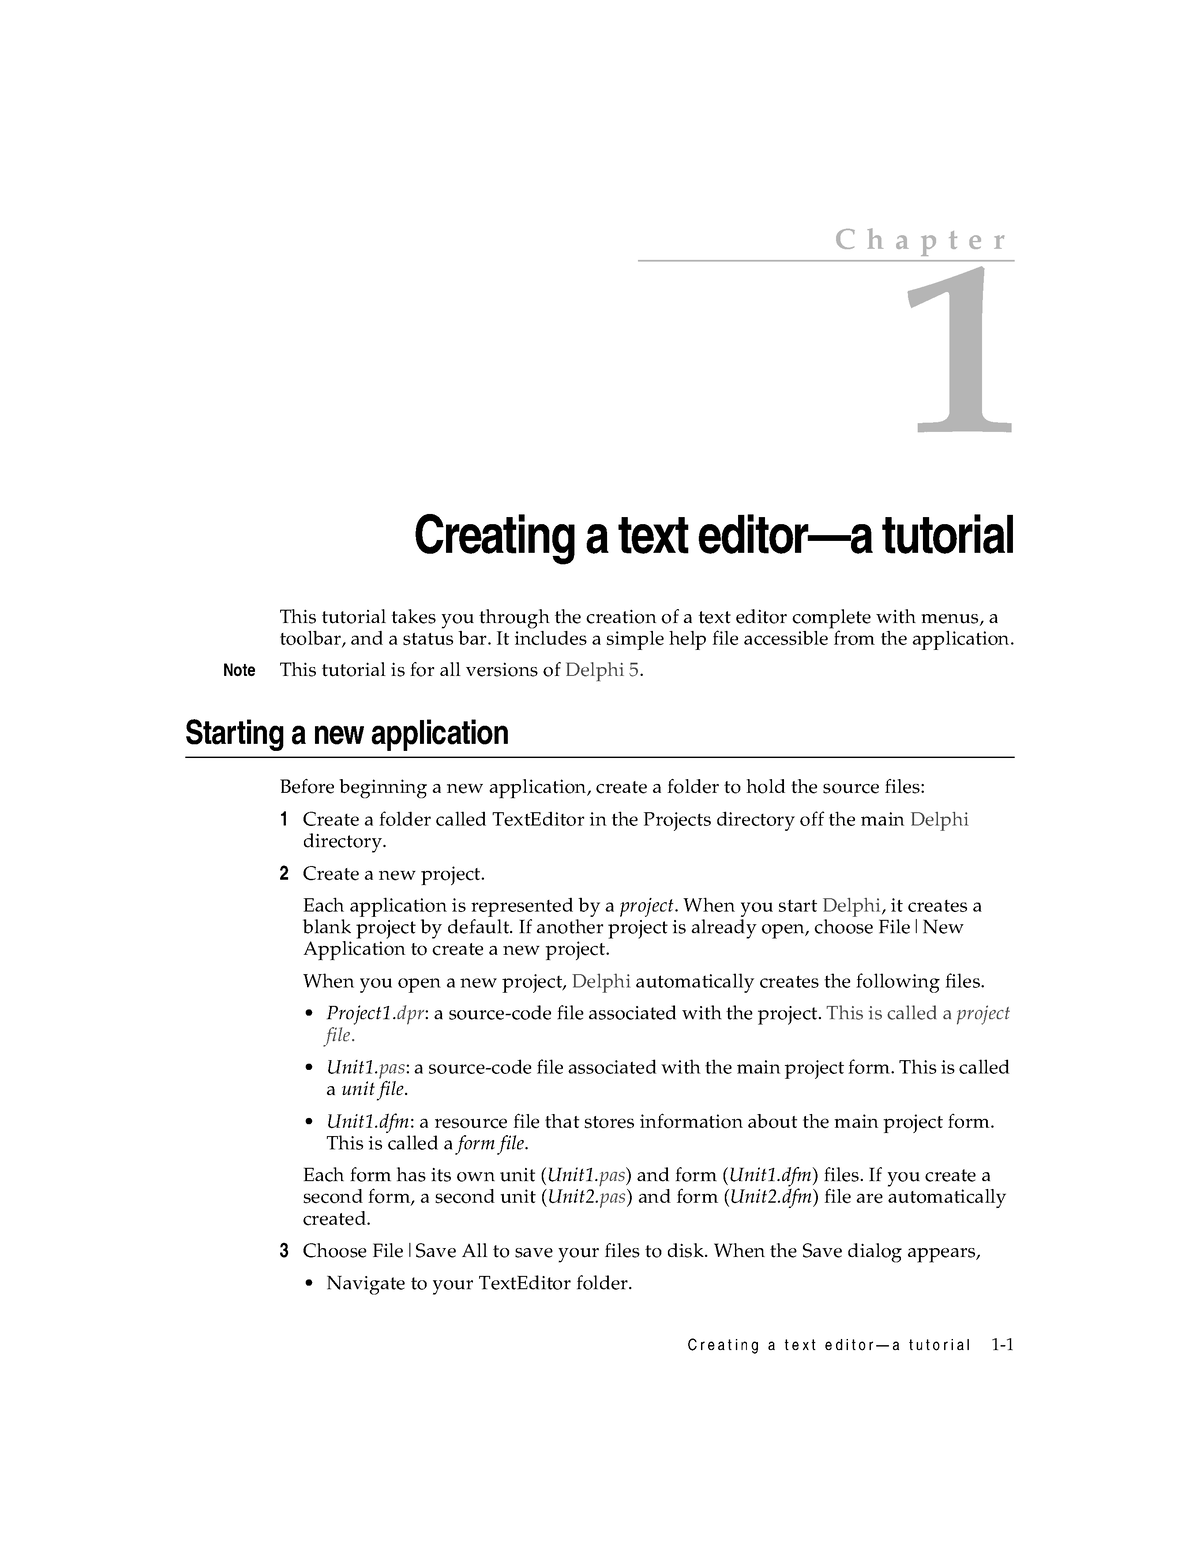 creating-a-text-editor-in-delphi-a-tutorial-creating-a-text-editor-a